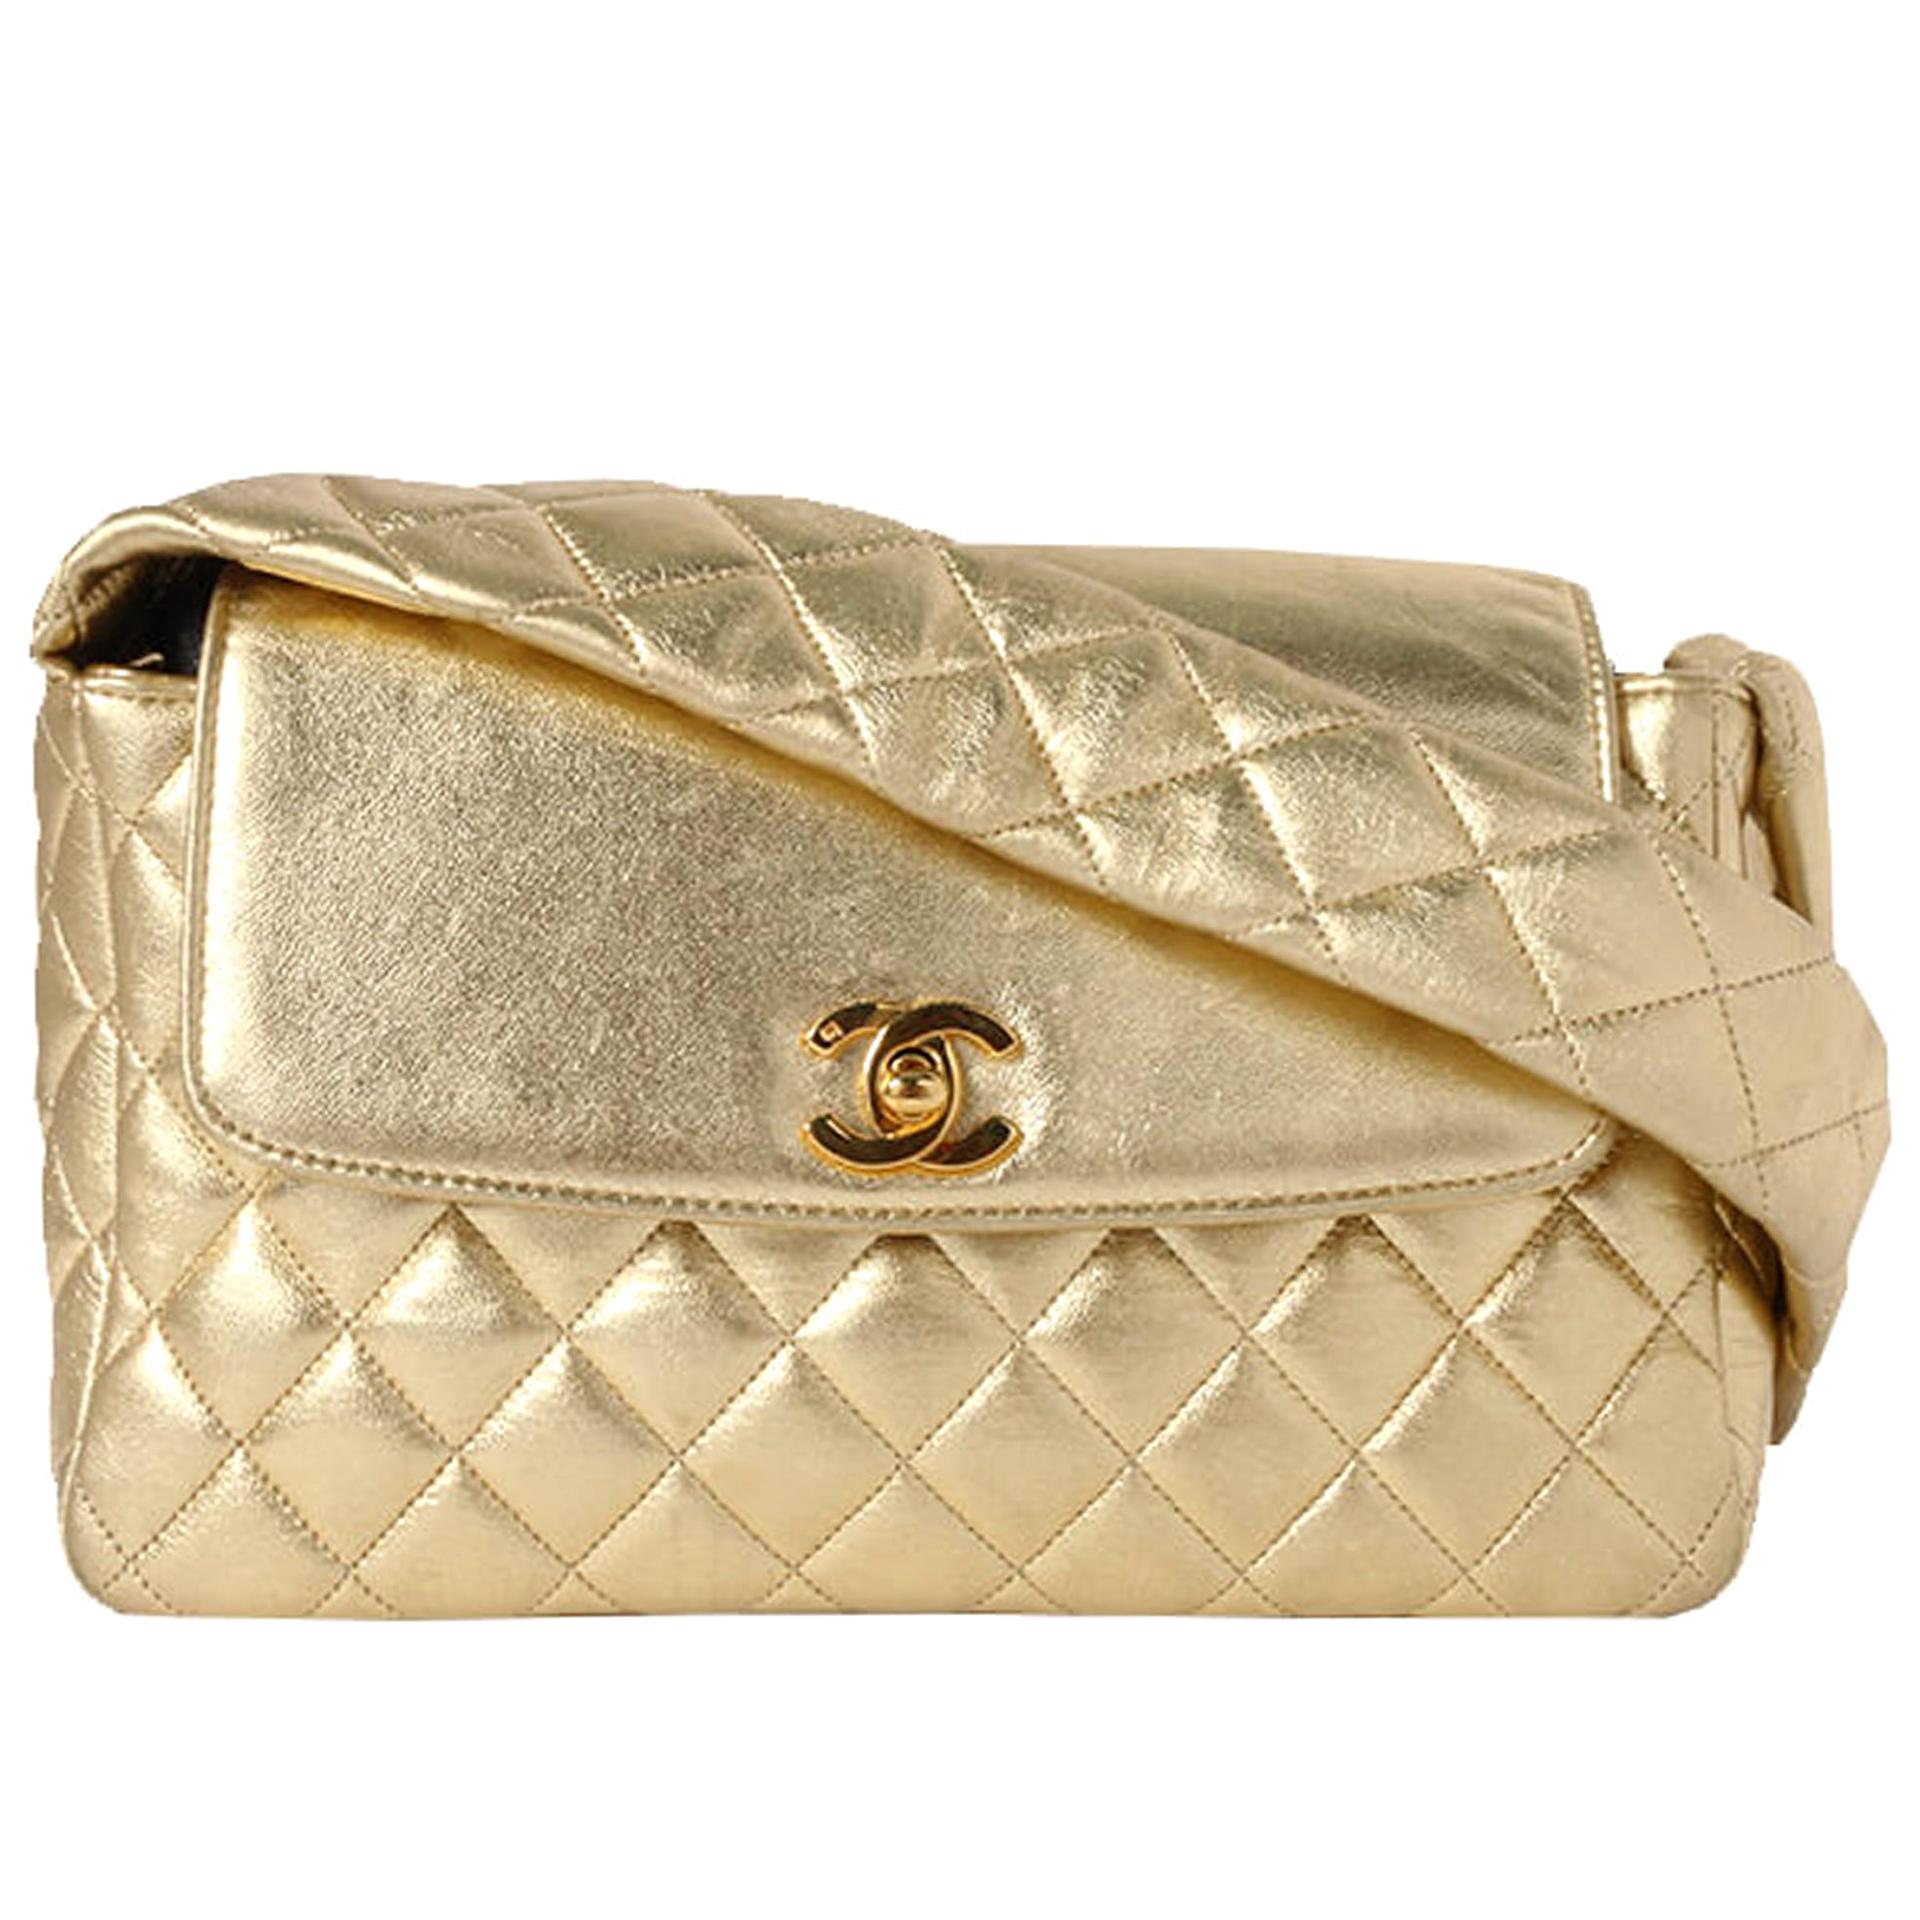 Chanel Classic Rare Limited Edition 1994 Gold Metallic Quilted Lambskin Flap Bag